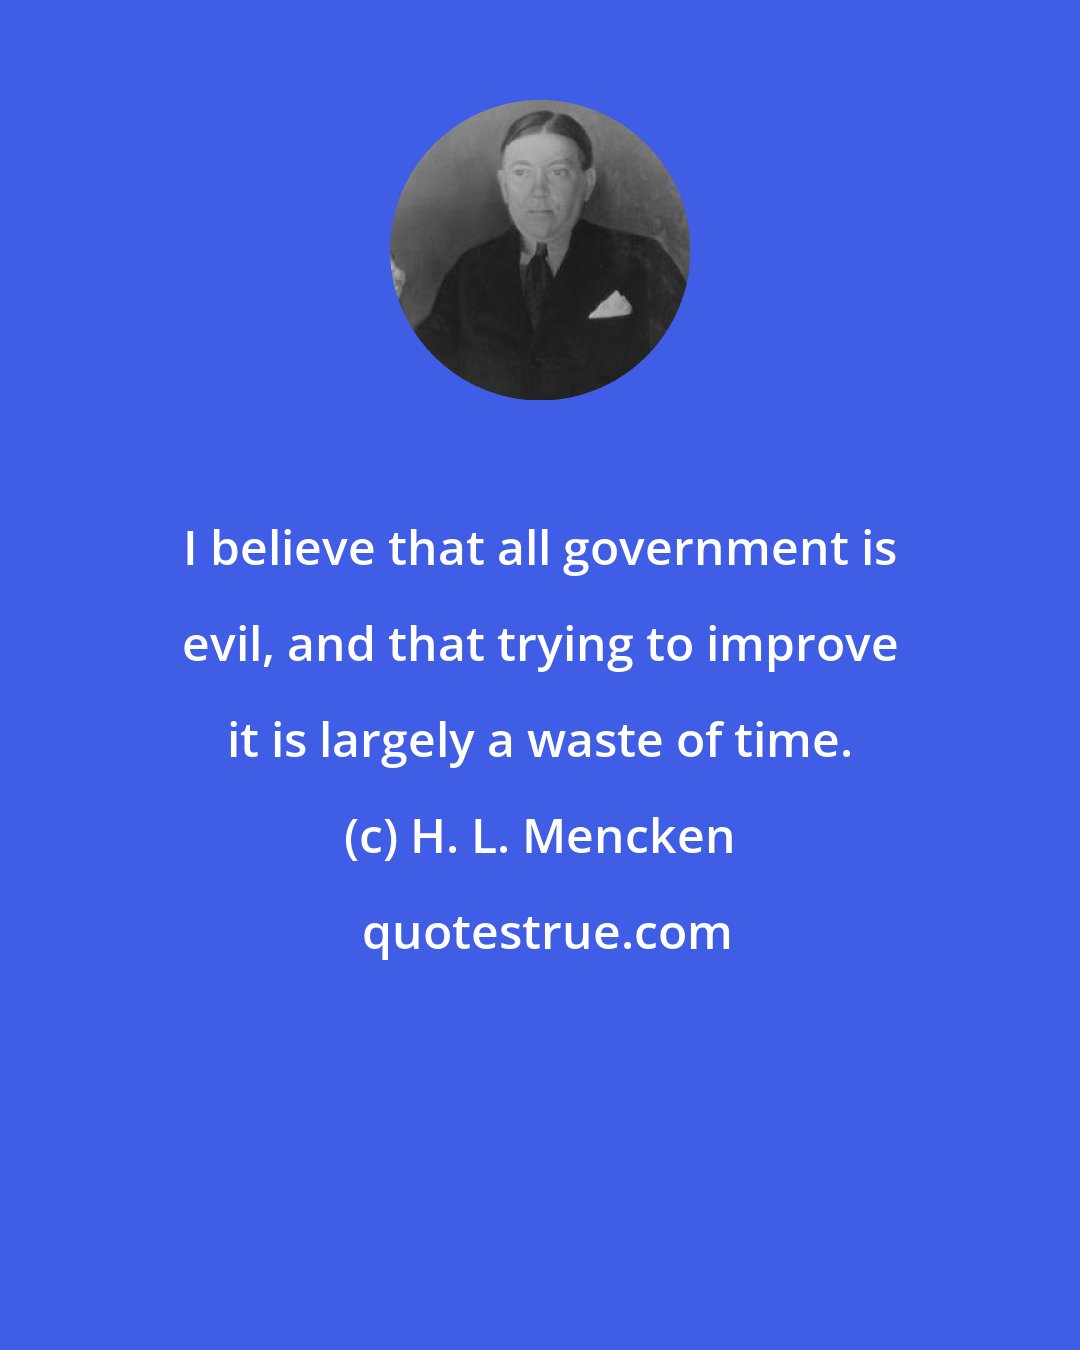 H. L. Mencken: I believe that all government is evil, and that trying to improve it is largely a waste of time.